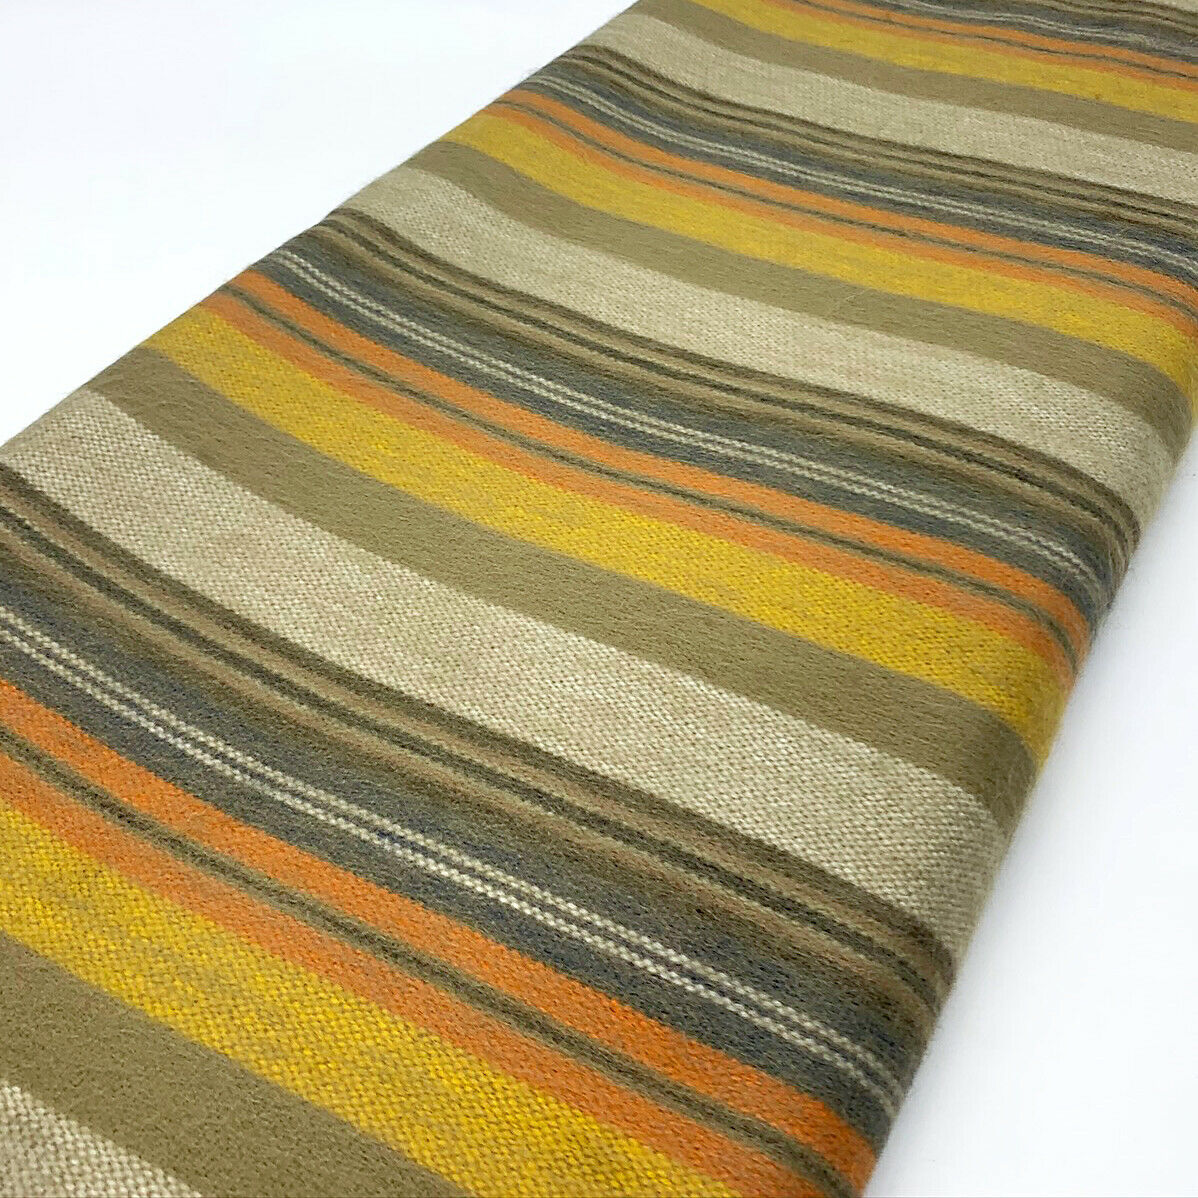 Rumi - Baby Alpaca Wool Throw Blanket / Sofa Cover - Queen 90" x 65" - multi colored thin stripes pattern